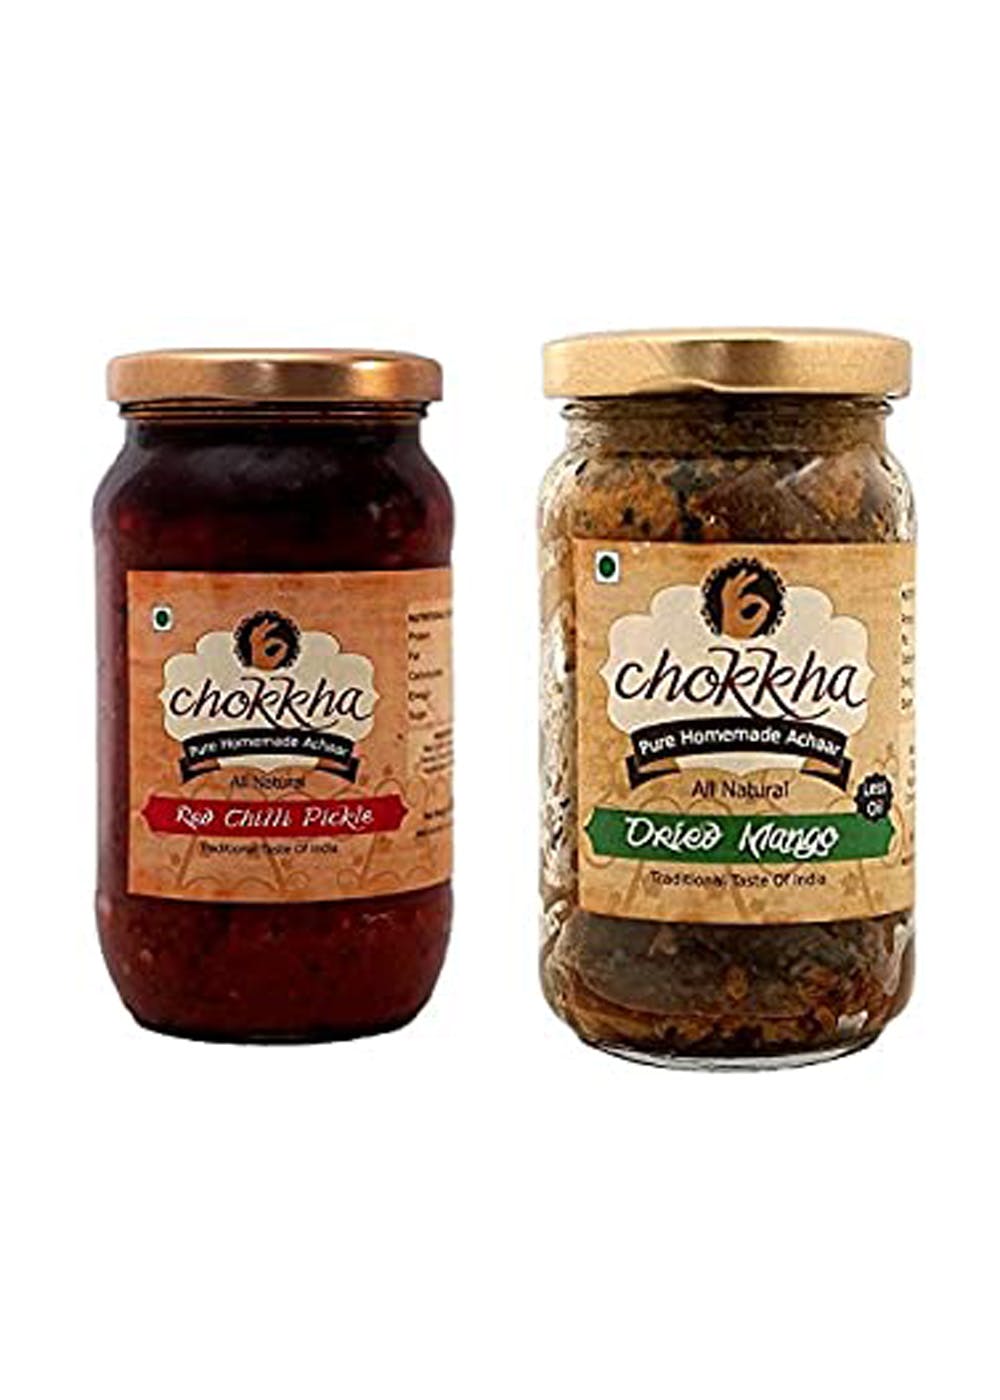 Dried Mango & Red Chilli Pickle Combo, 200 Gm Each